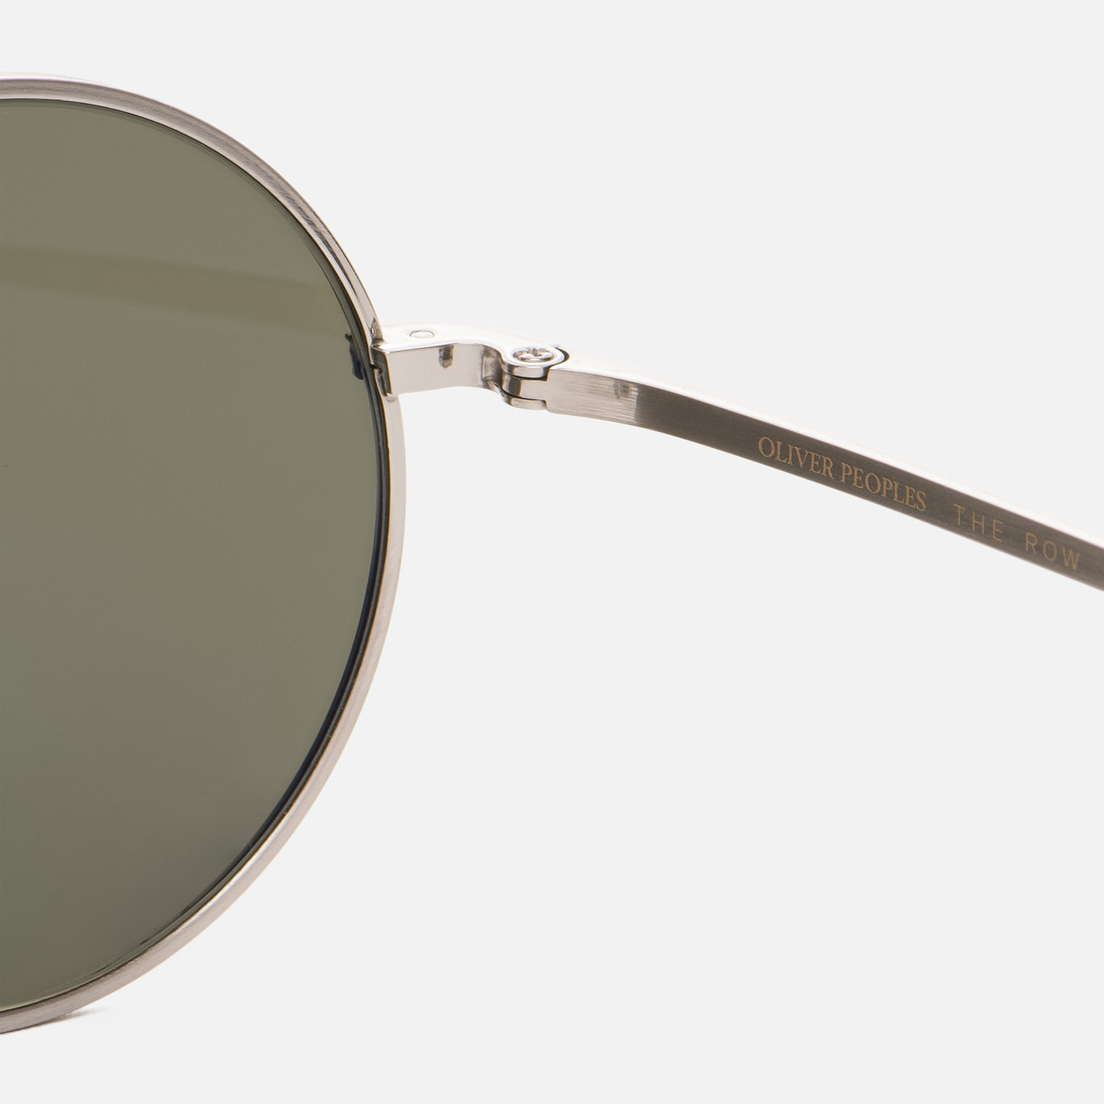 Oliver Peoples Солнцезащитные очки The Row